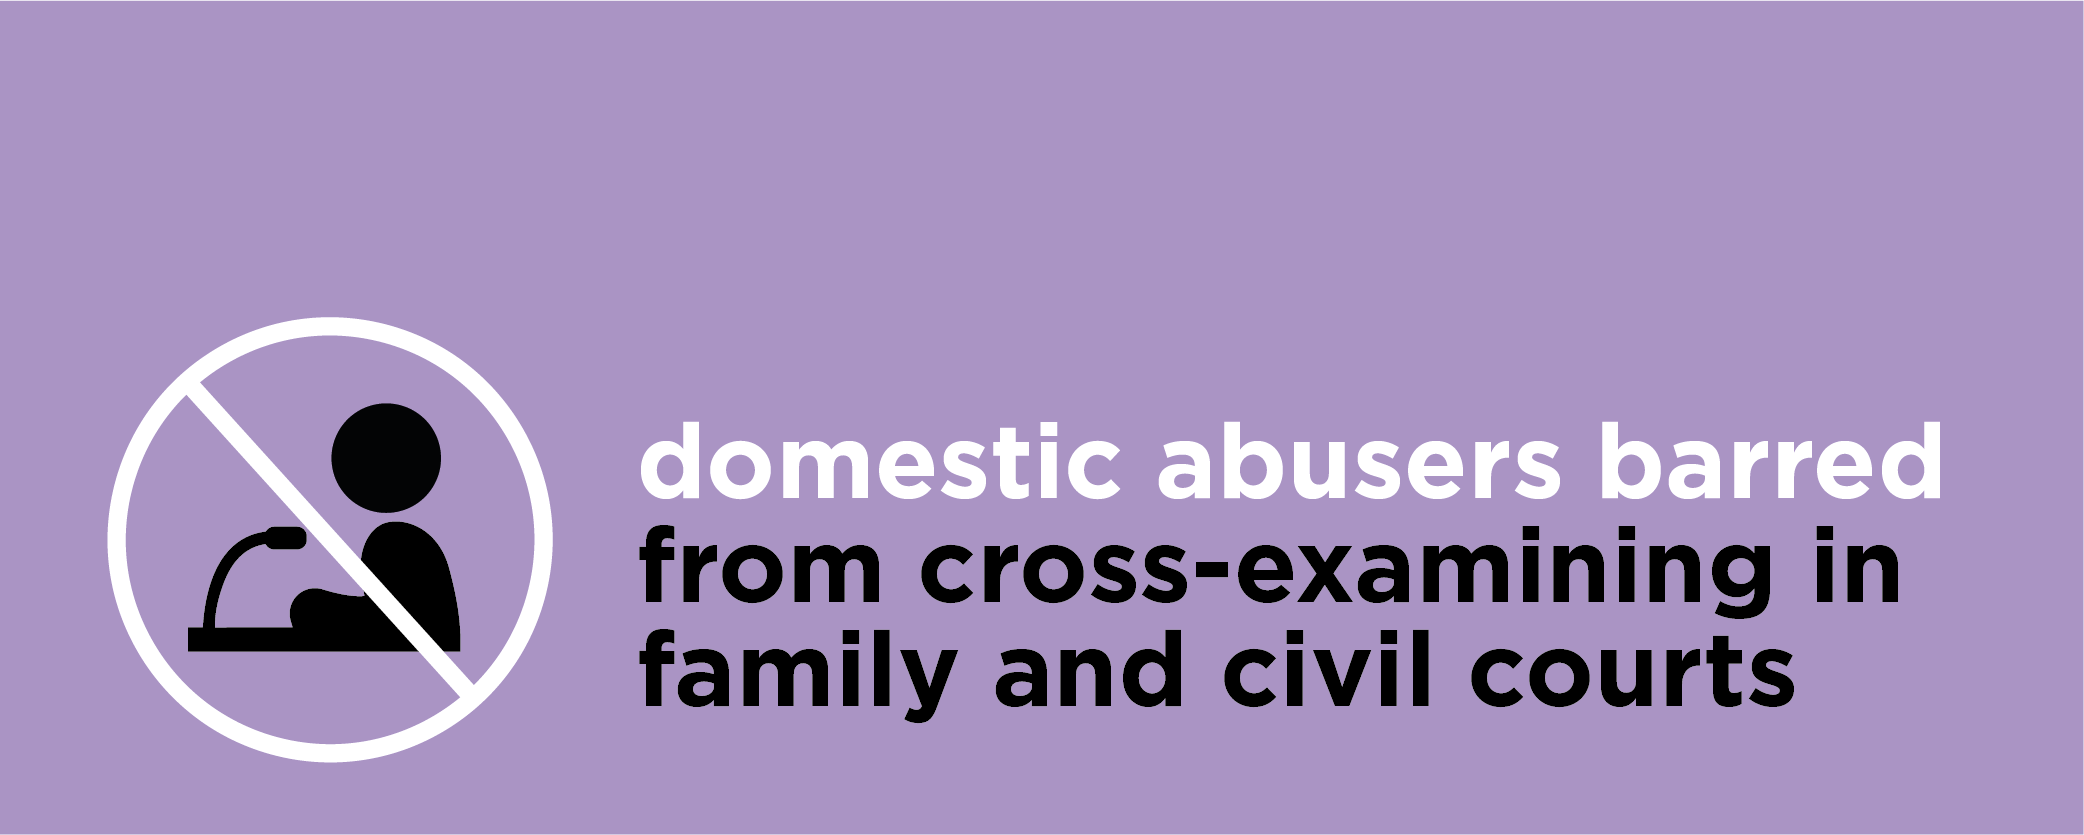 Domestic abusers barred from cross-examining in court